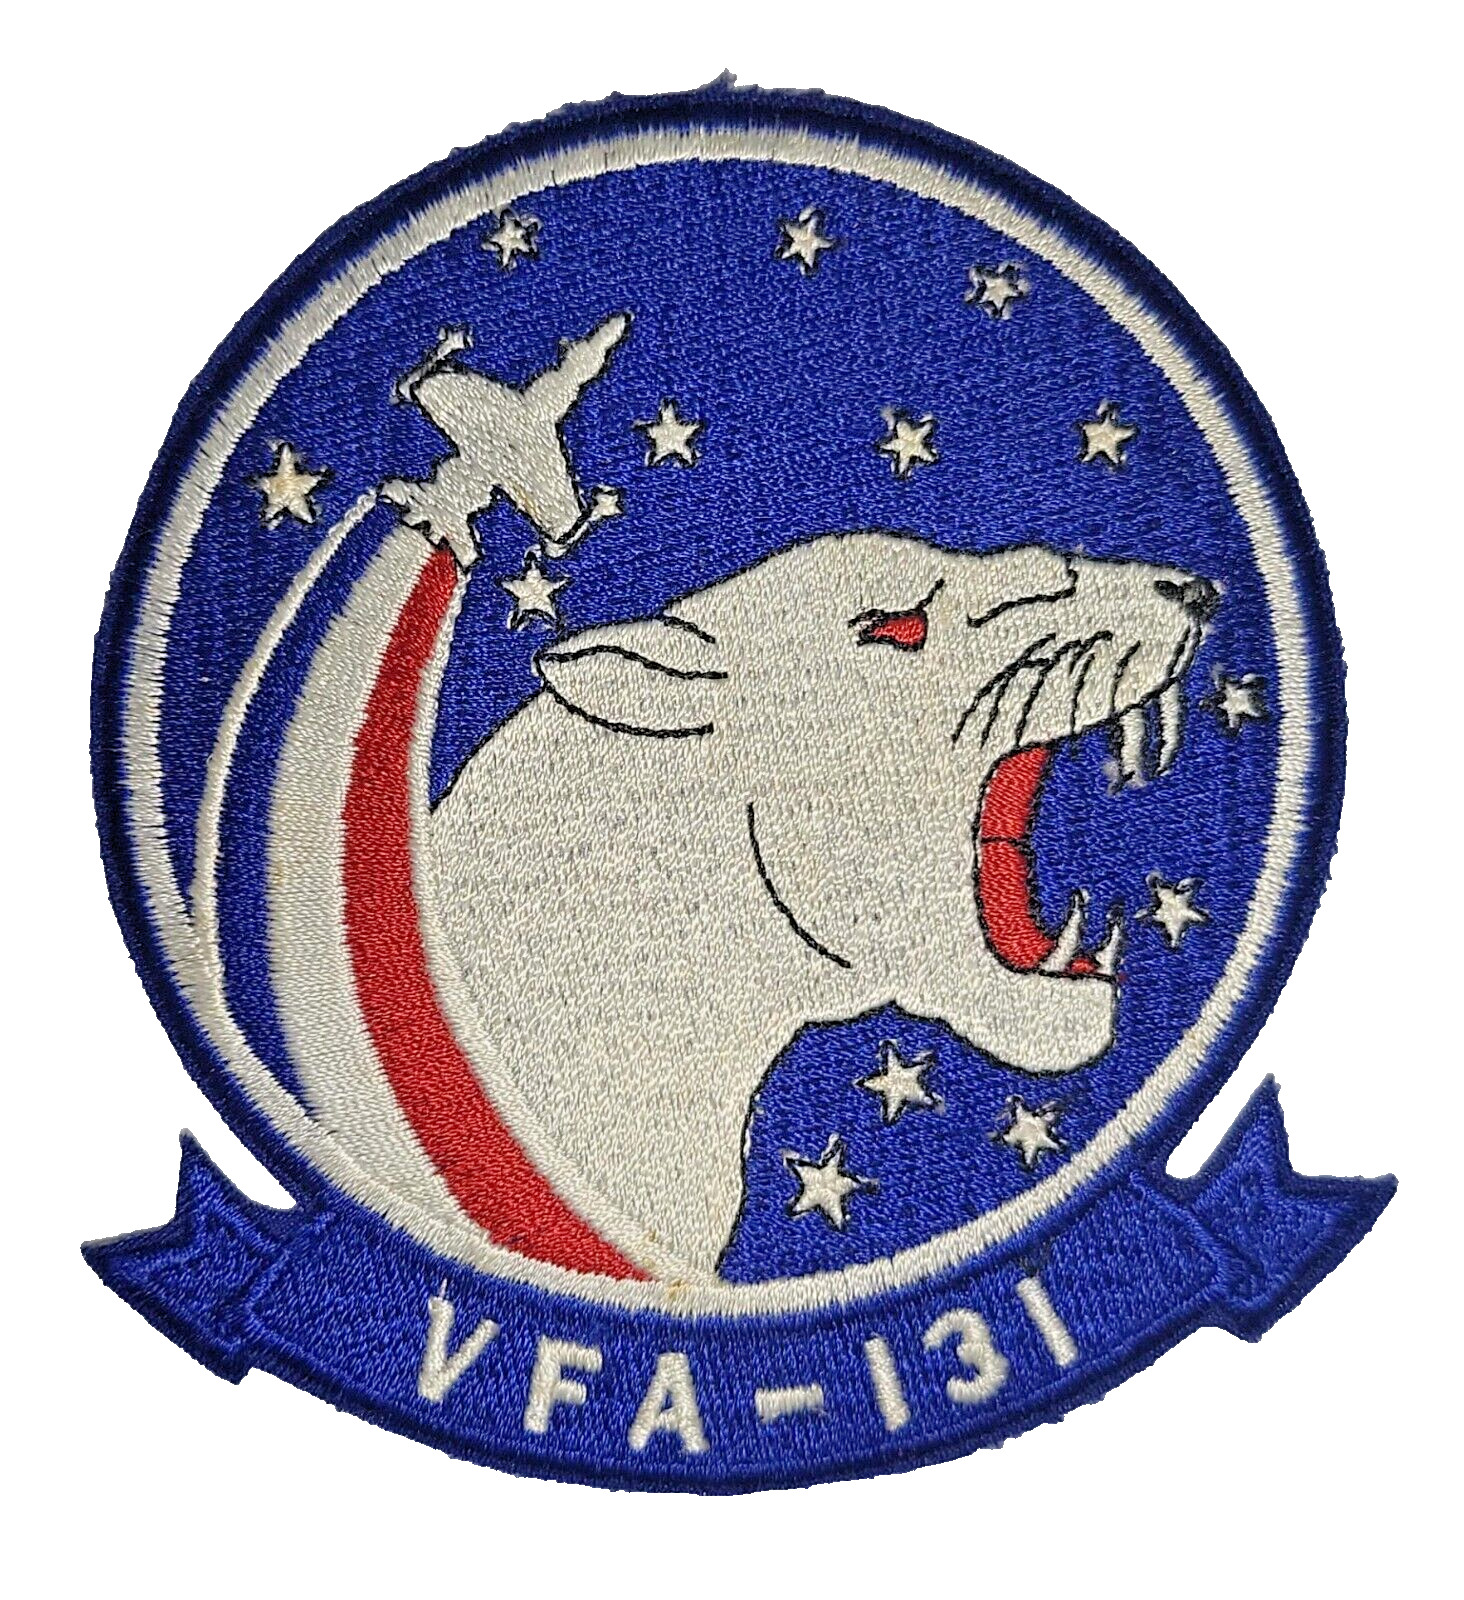 US Navy VFA-131 Wildcats F-18 Hornets Strike Fighter Squadron Patch